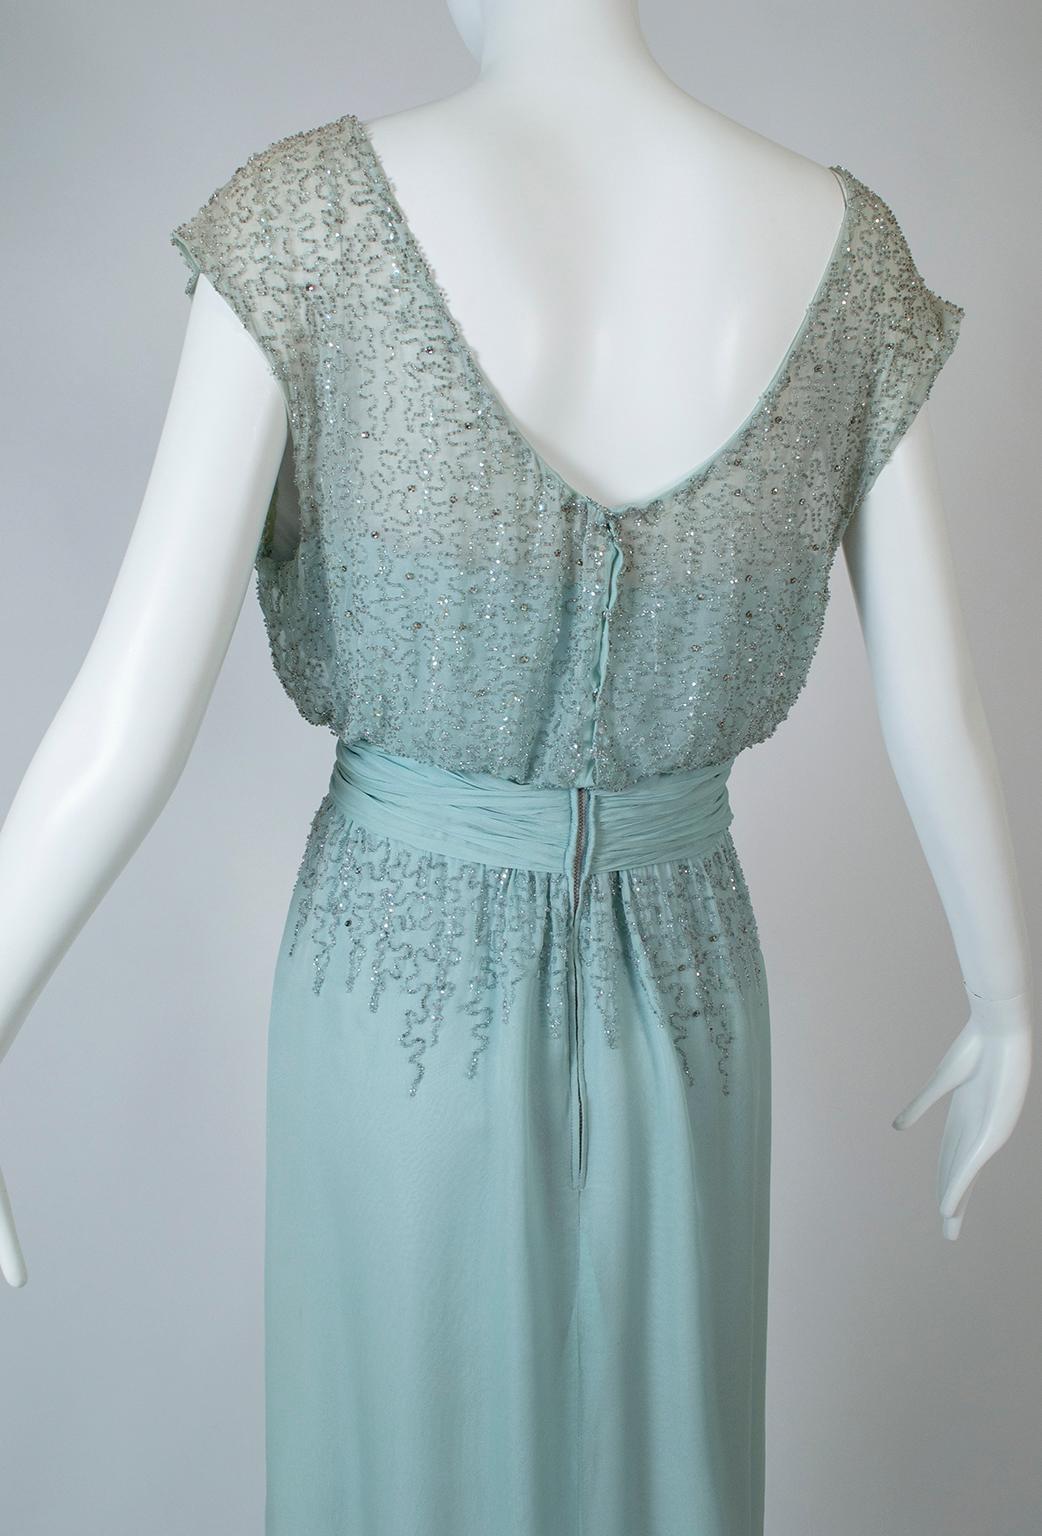 Rudolf Pale Aqua Bead and Crystal Plunge-Back Blouson Cocktail Dress - M, 1950s In Good Condition For Sale In Tucson, AZ